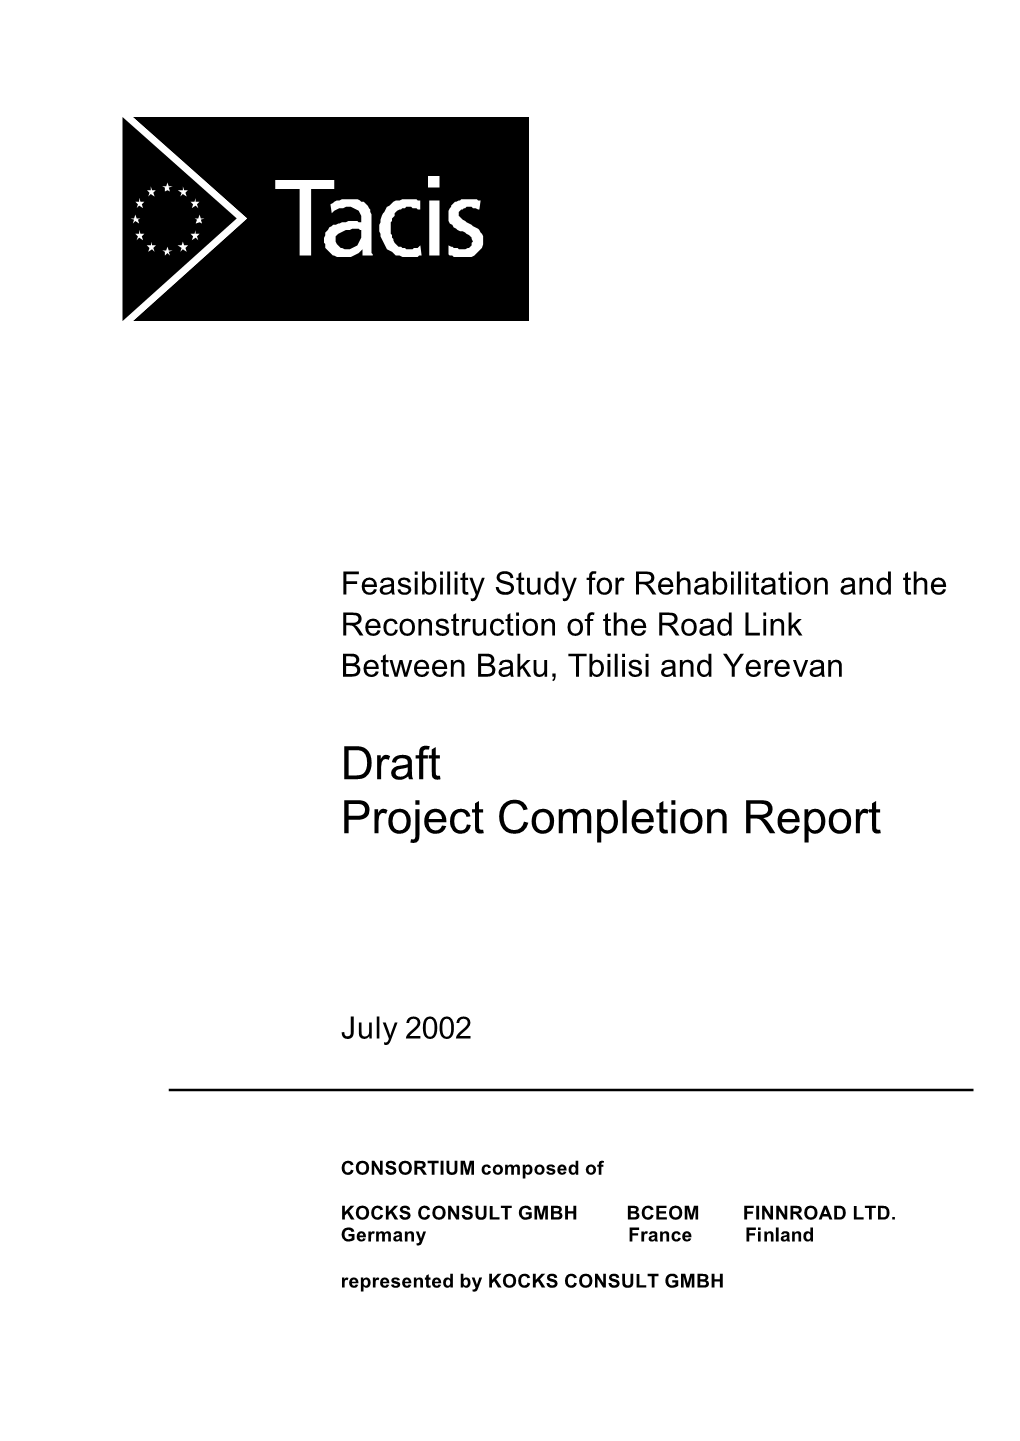 Feasibility Study for the Rehabilitation and Reconstruction of The